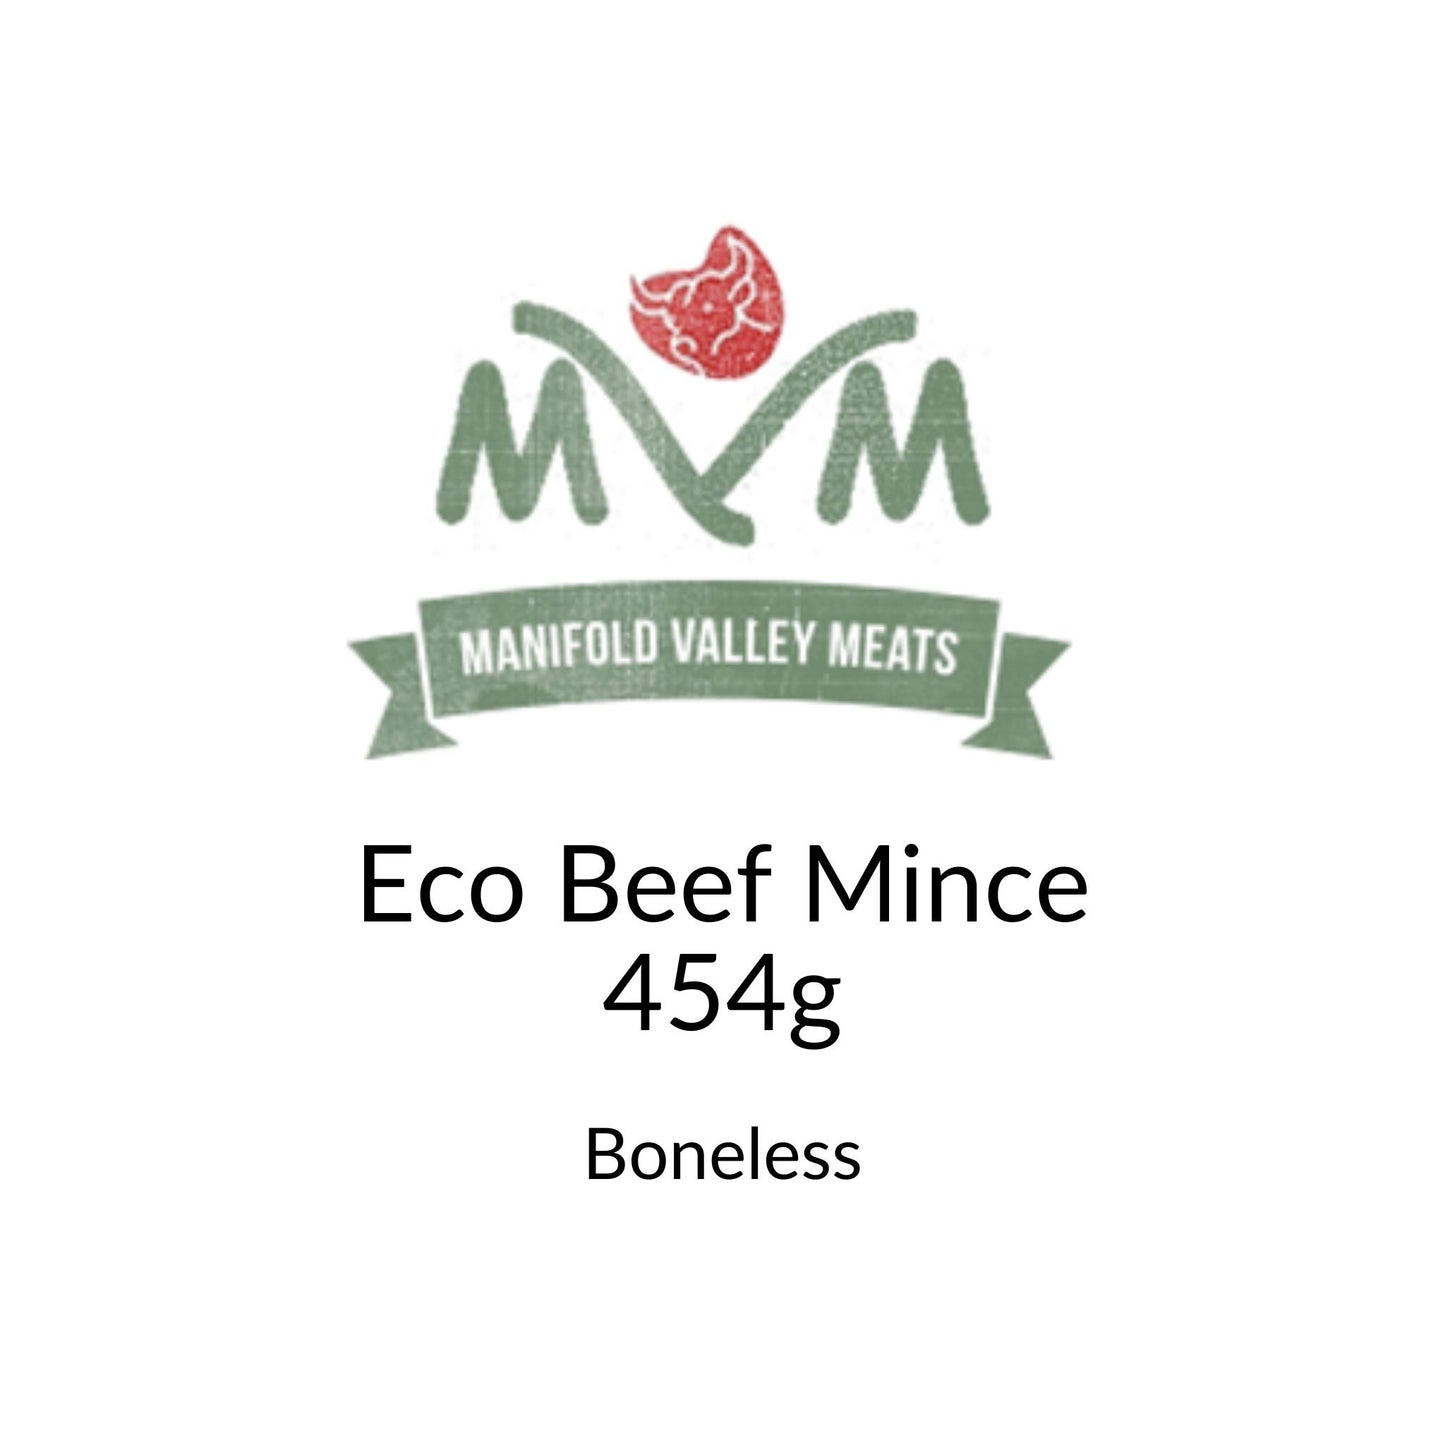 Manifold Valley Meats Eco Beef Mince Raw Dog Food